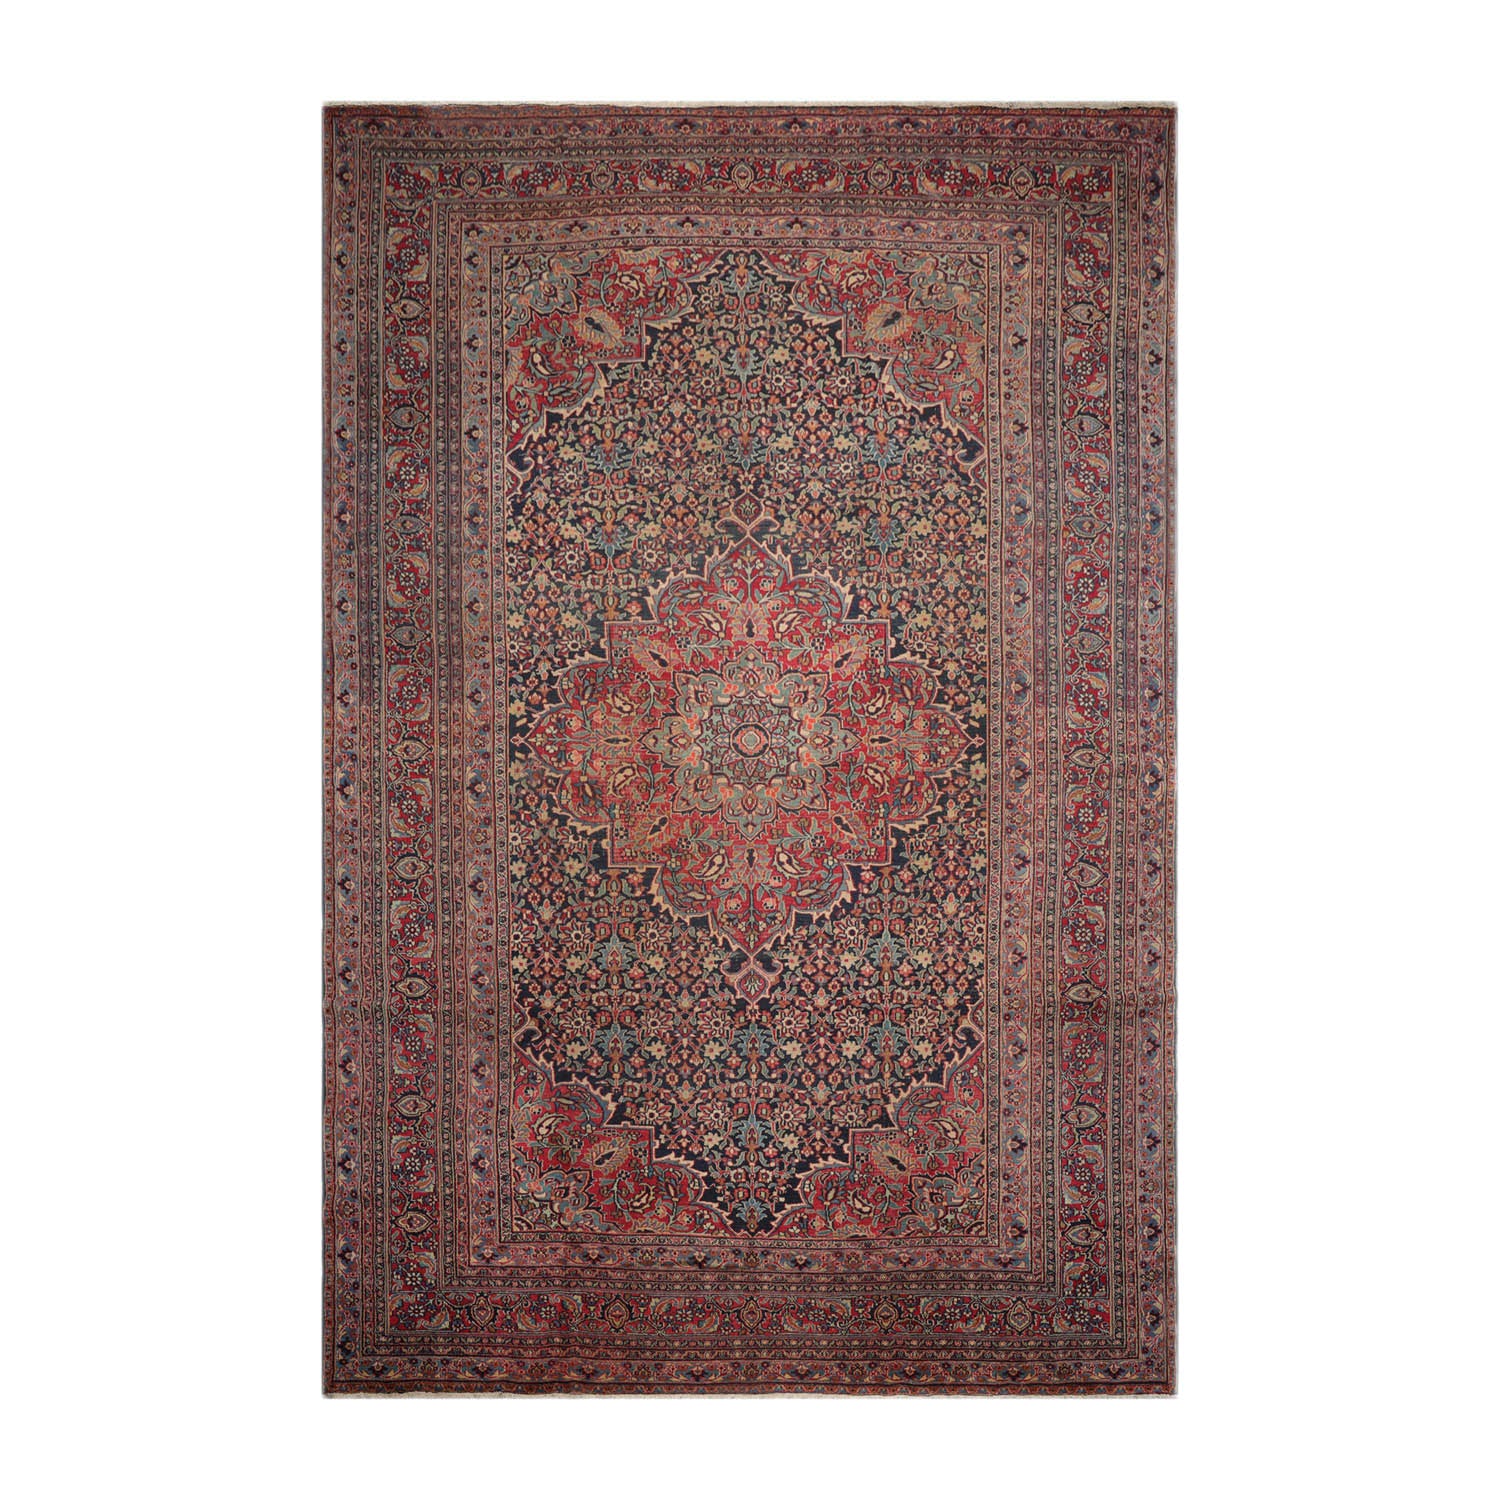 Nevitt Palace Hand Knotted 100% Wool Khorassan Traditional Oriental Area Rug Midnight Blue, Blush Color